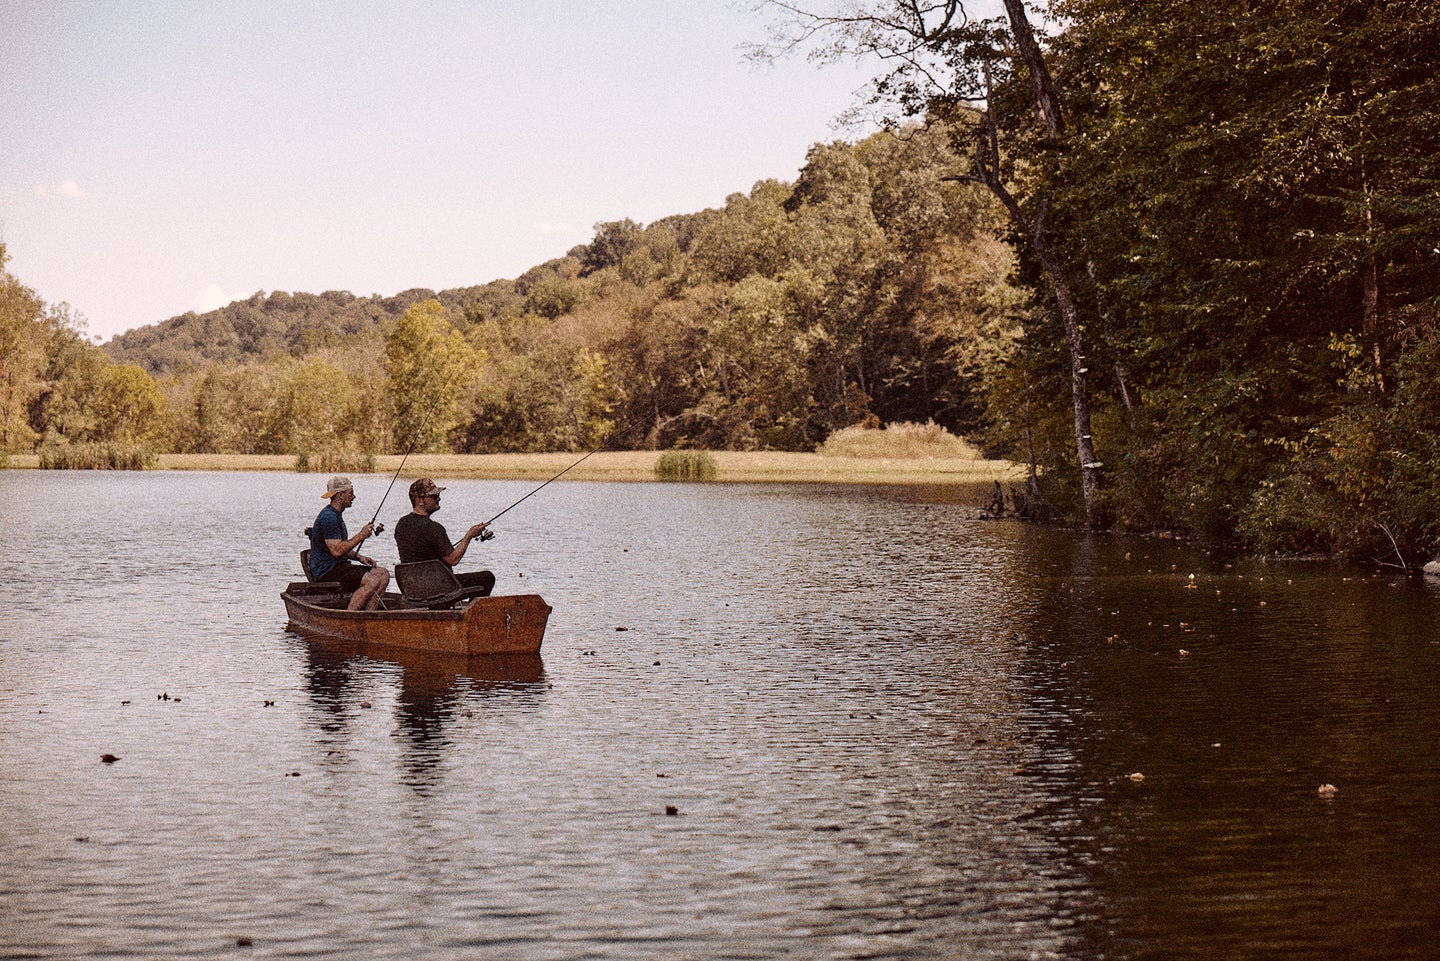 Two fishermen bass fish from a canoe on a pond